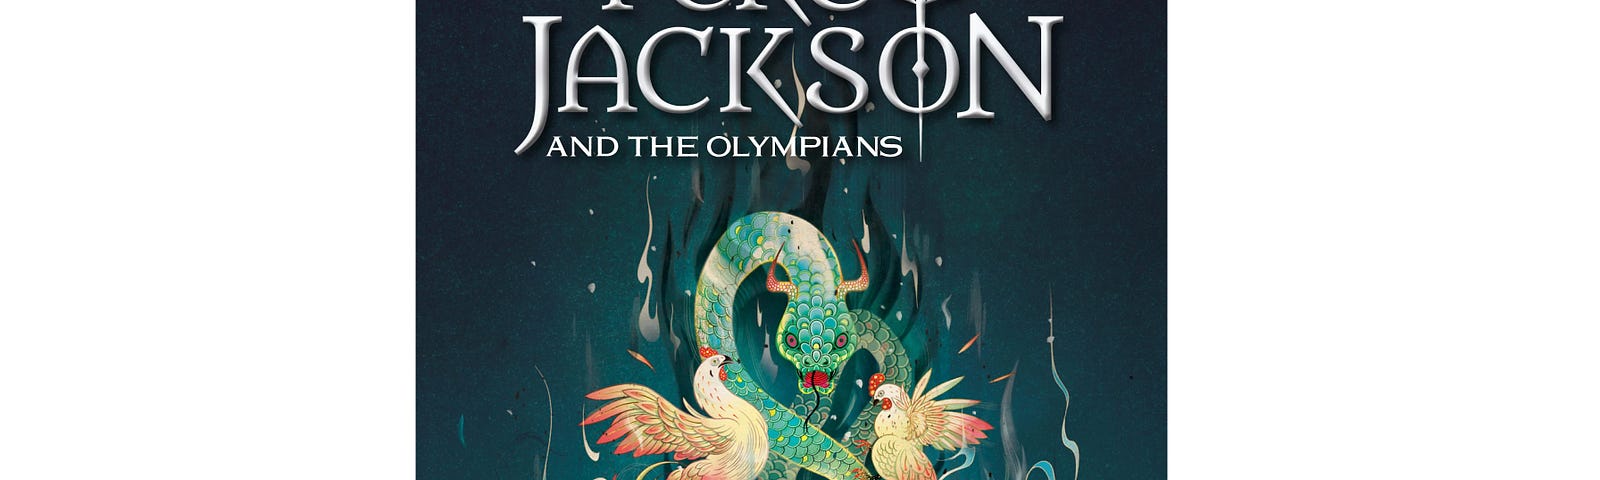 The cover of Percy Jackson and the Olympians book 6: The Chalice of the Gods, written by Rick Riordan. The cover has the image of a large, two handled chalice, with a large snake and two chickens coming out of it.